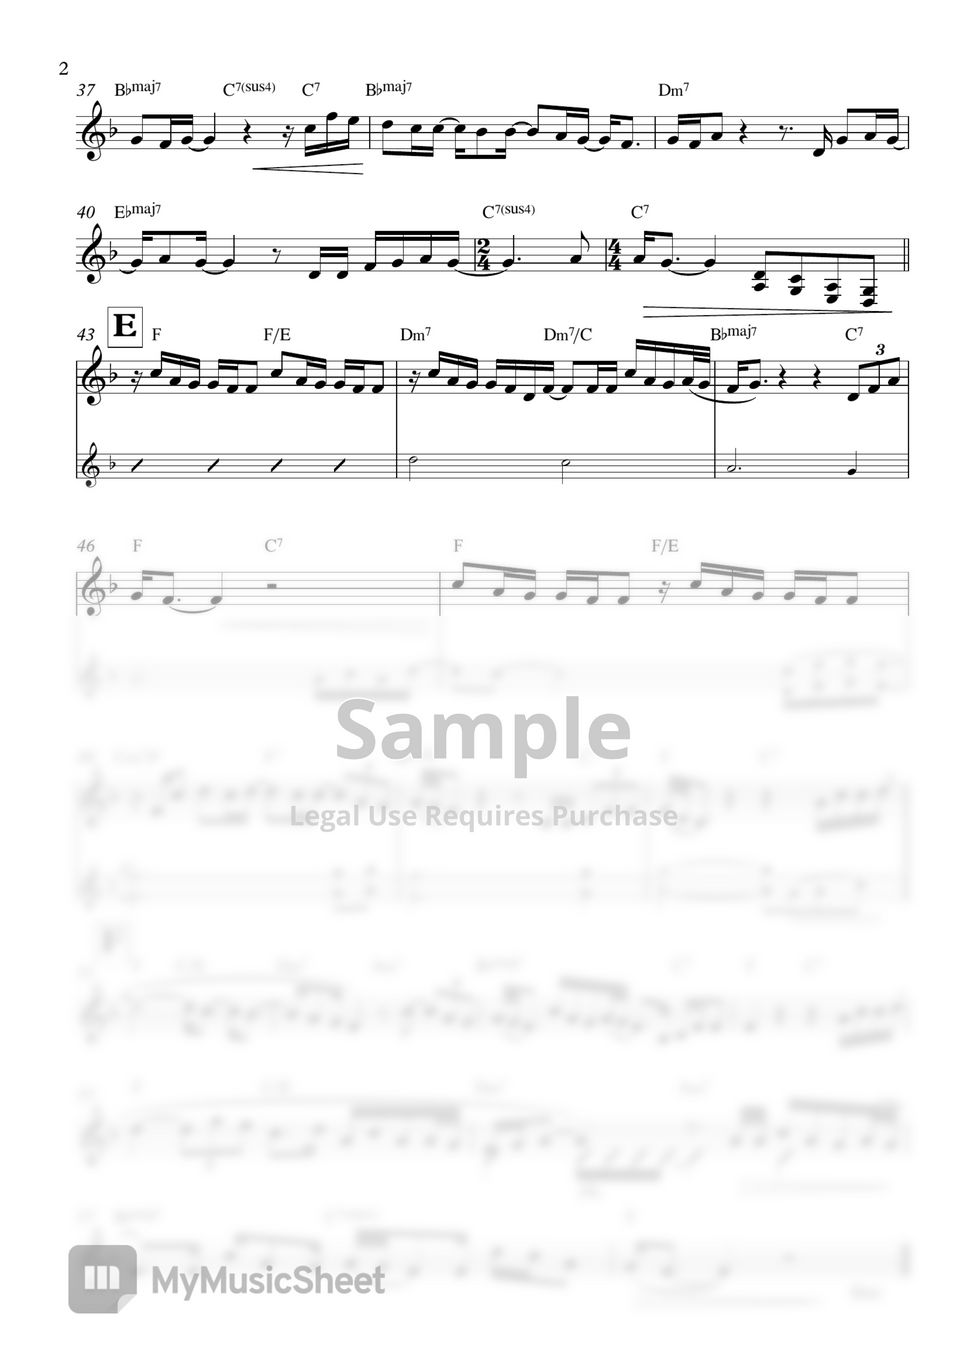 Michael Buble - Home by SheetMusicOnly1page